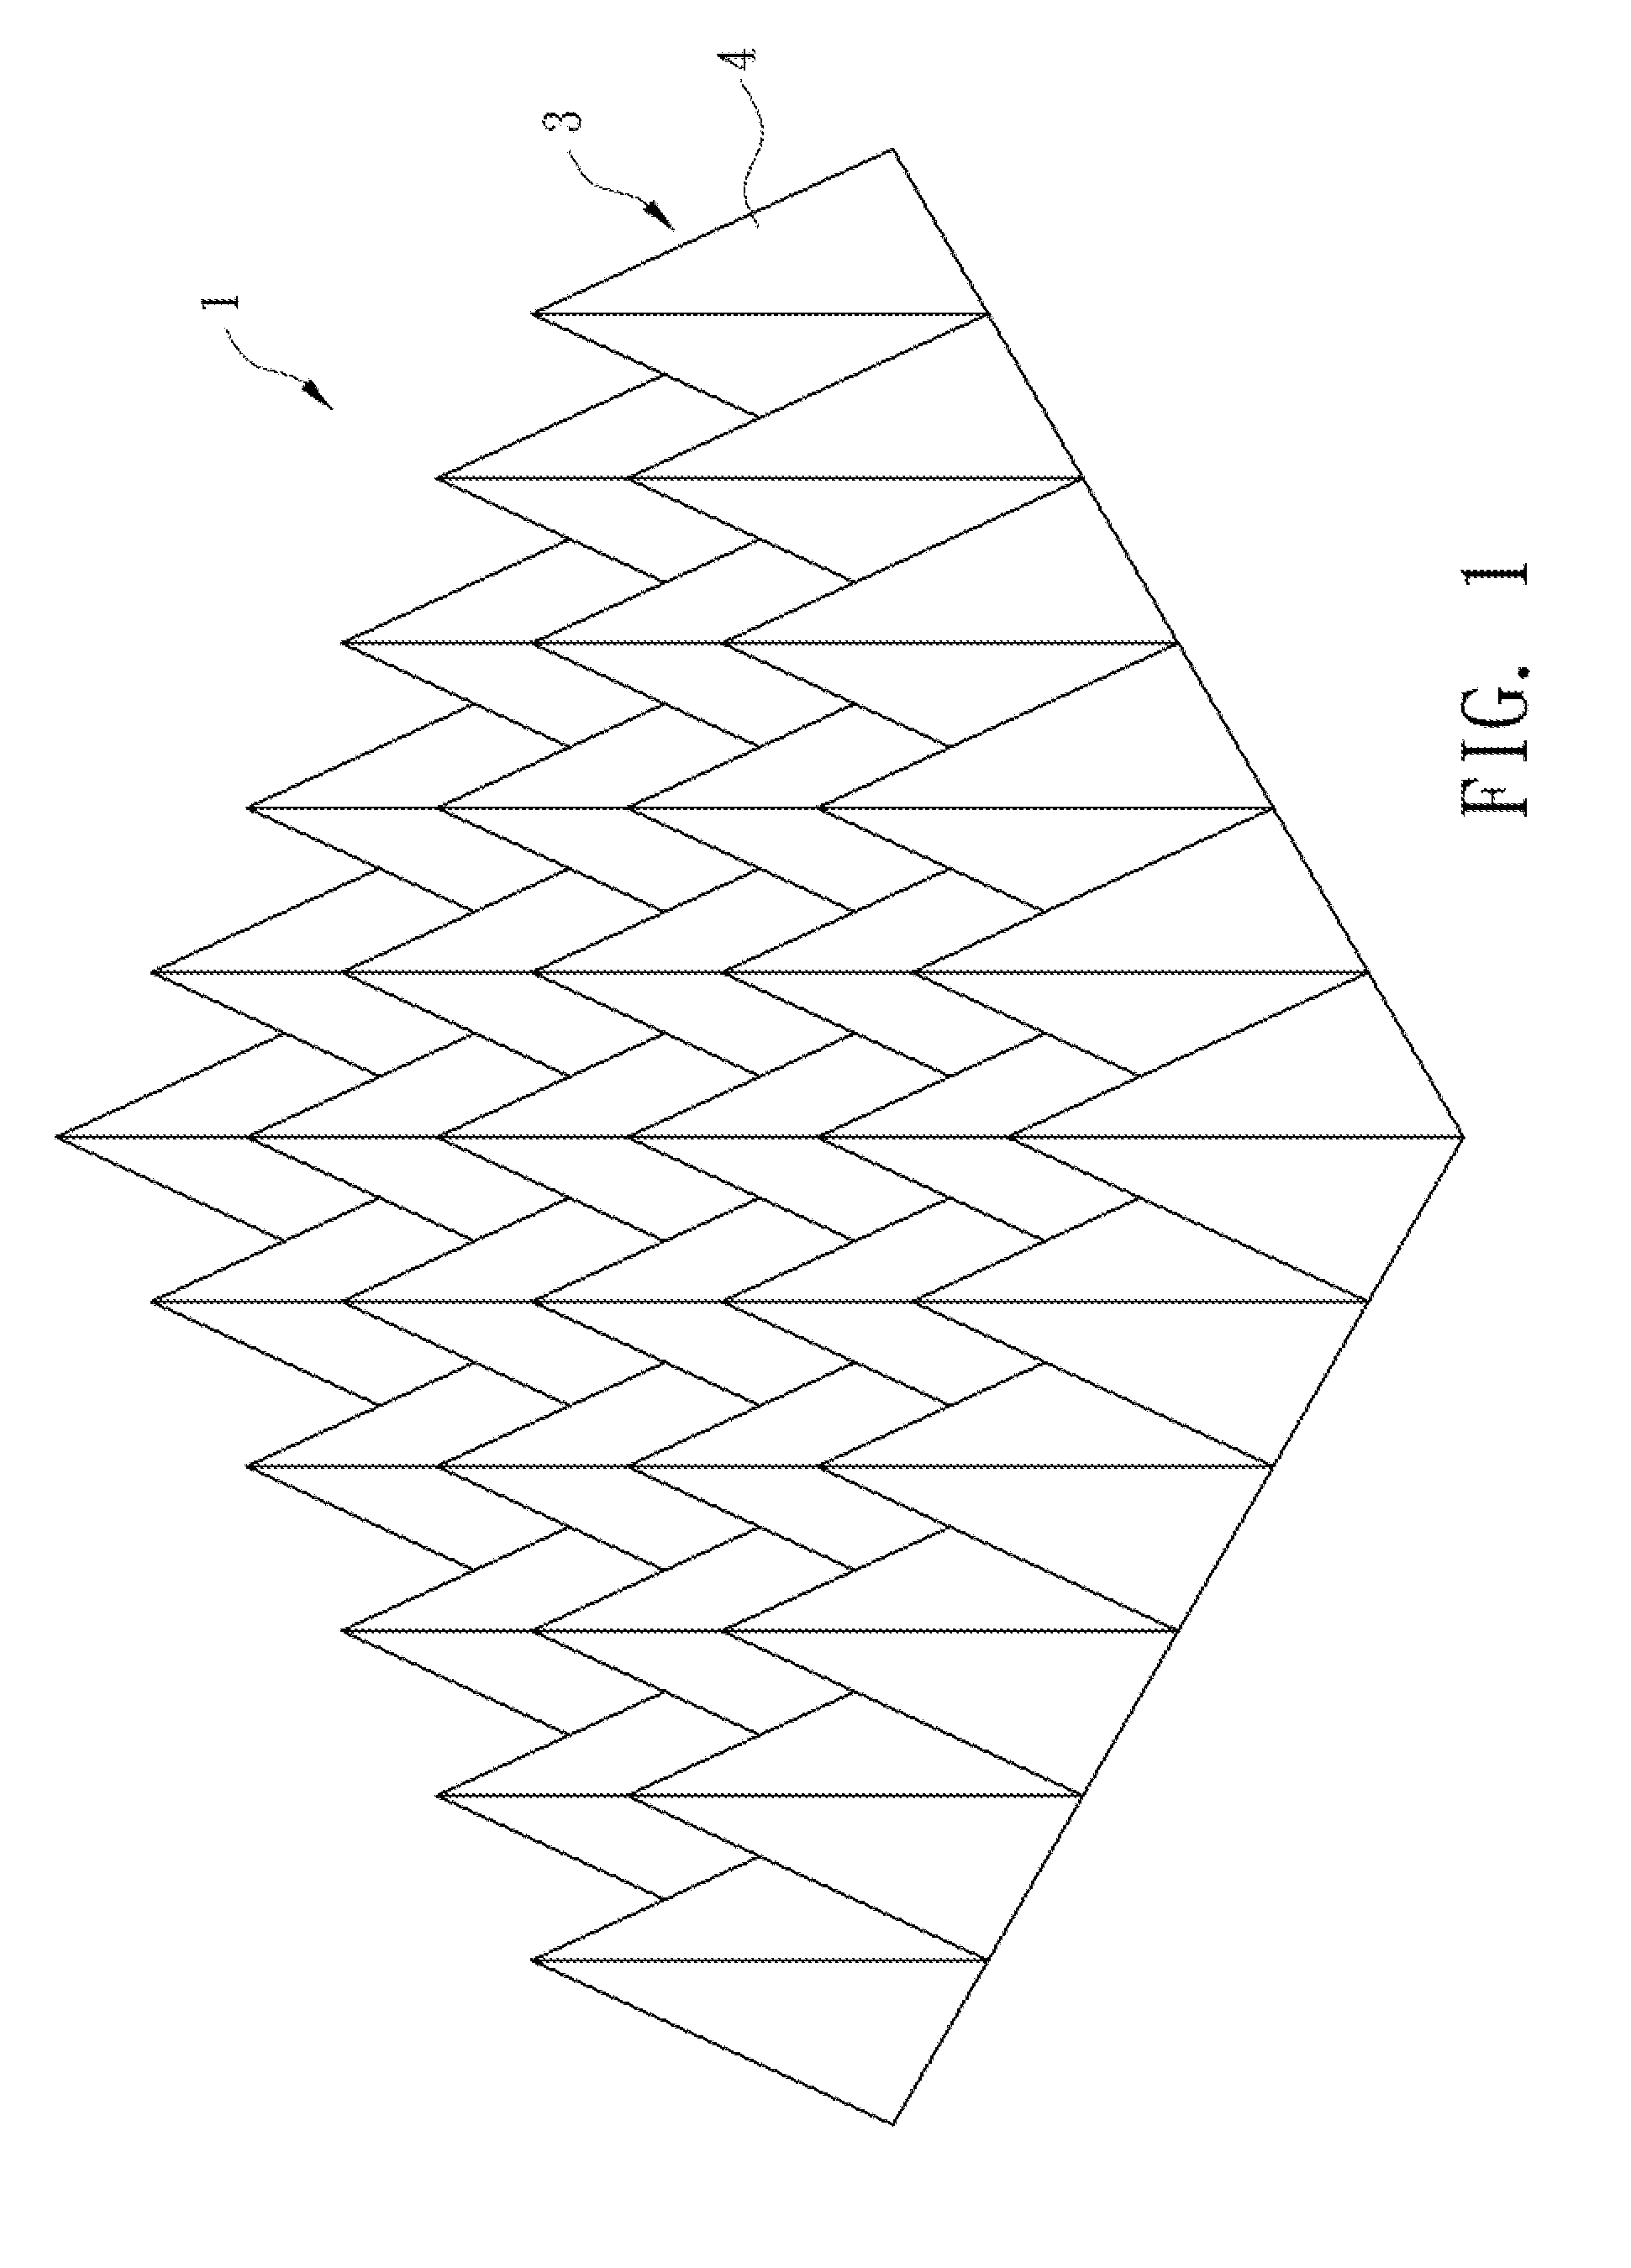 Solar power generation system with cone -shaped protrusions array